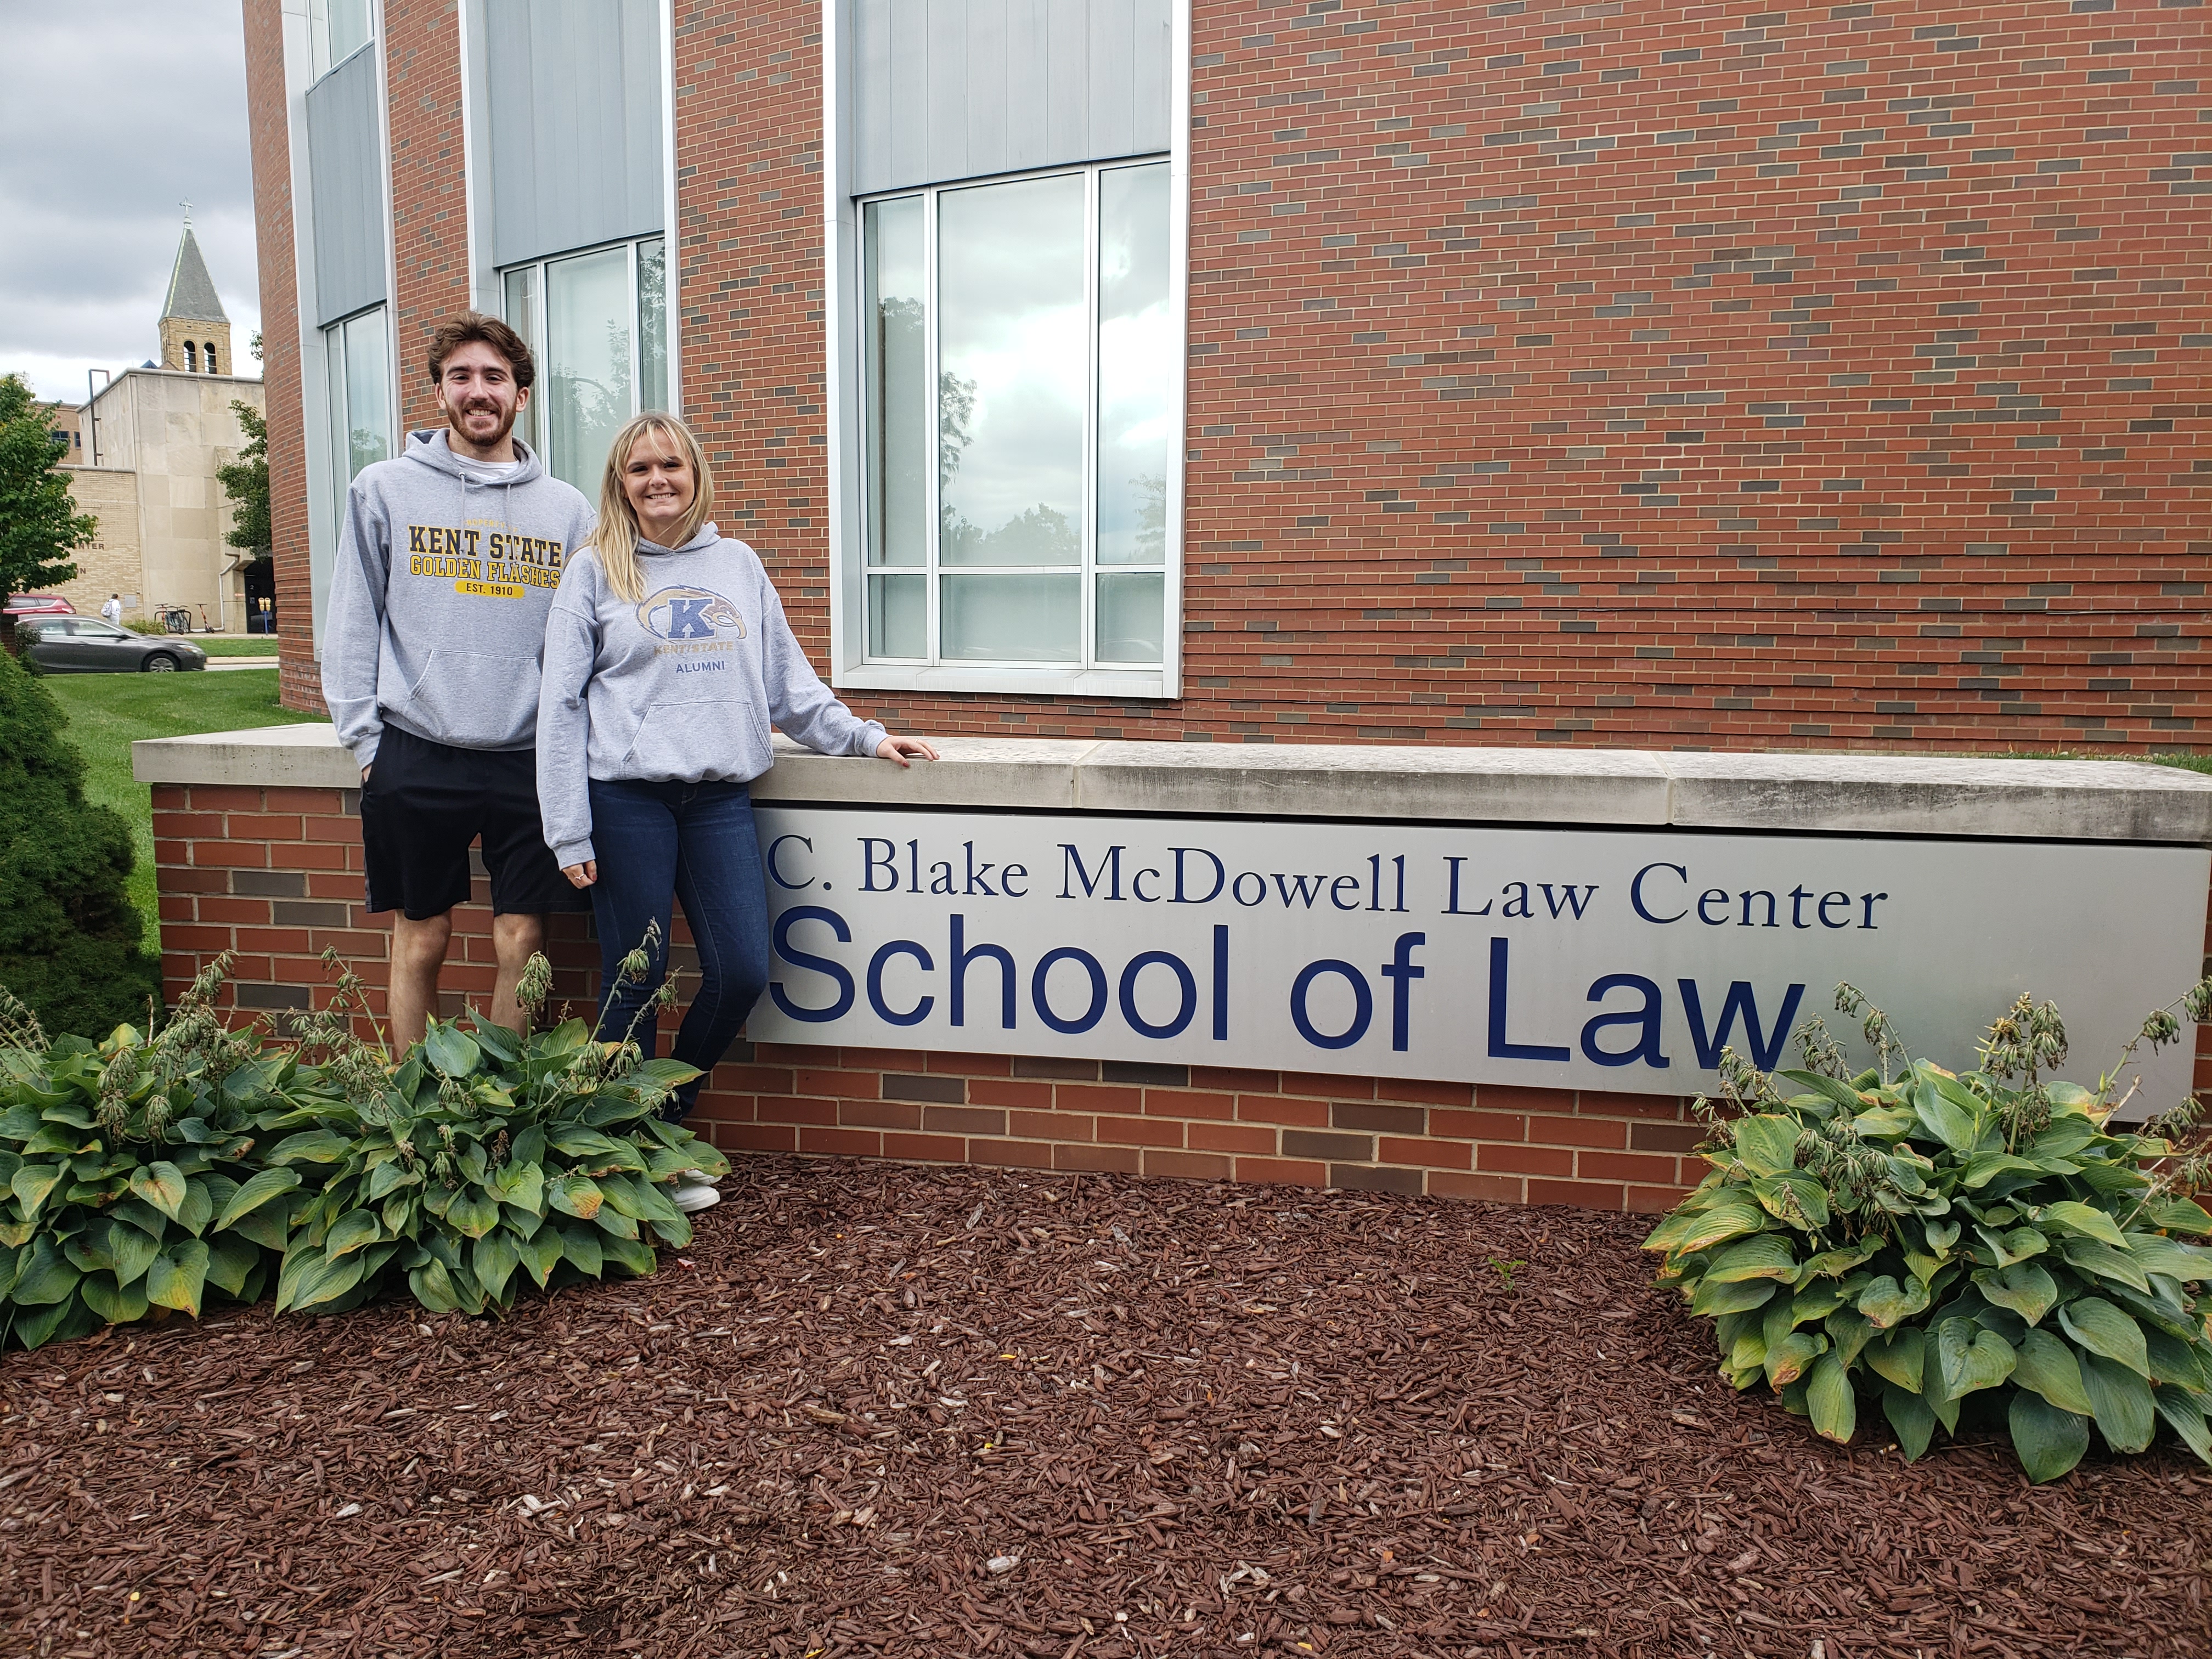 Akron Law welcomes students from Kent State in new 3+3 program